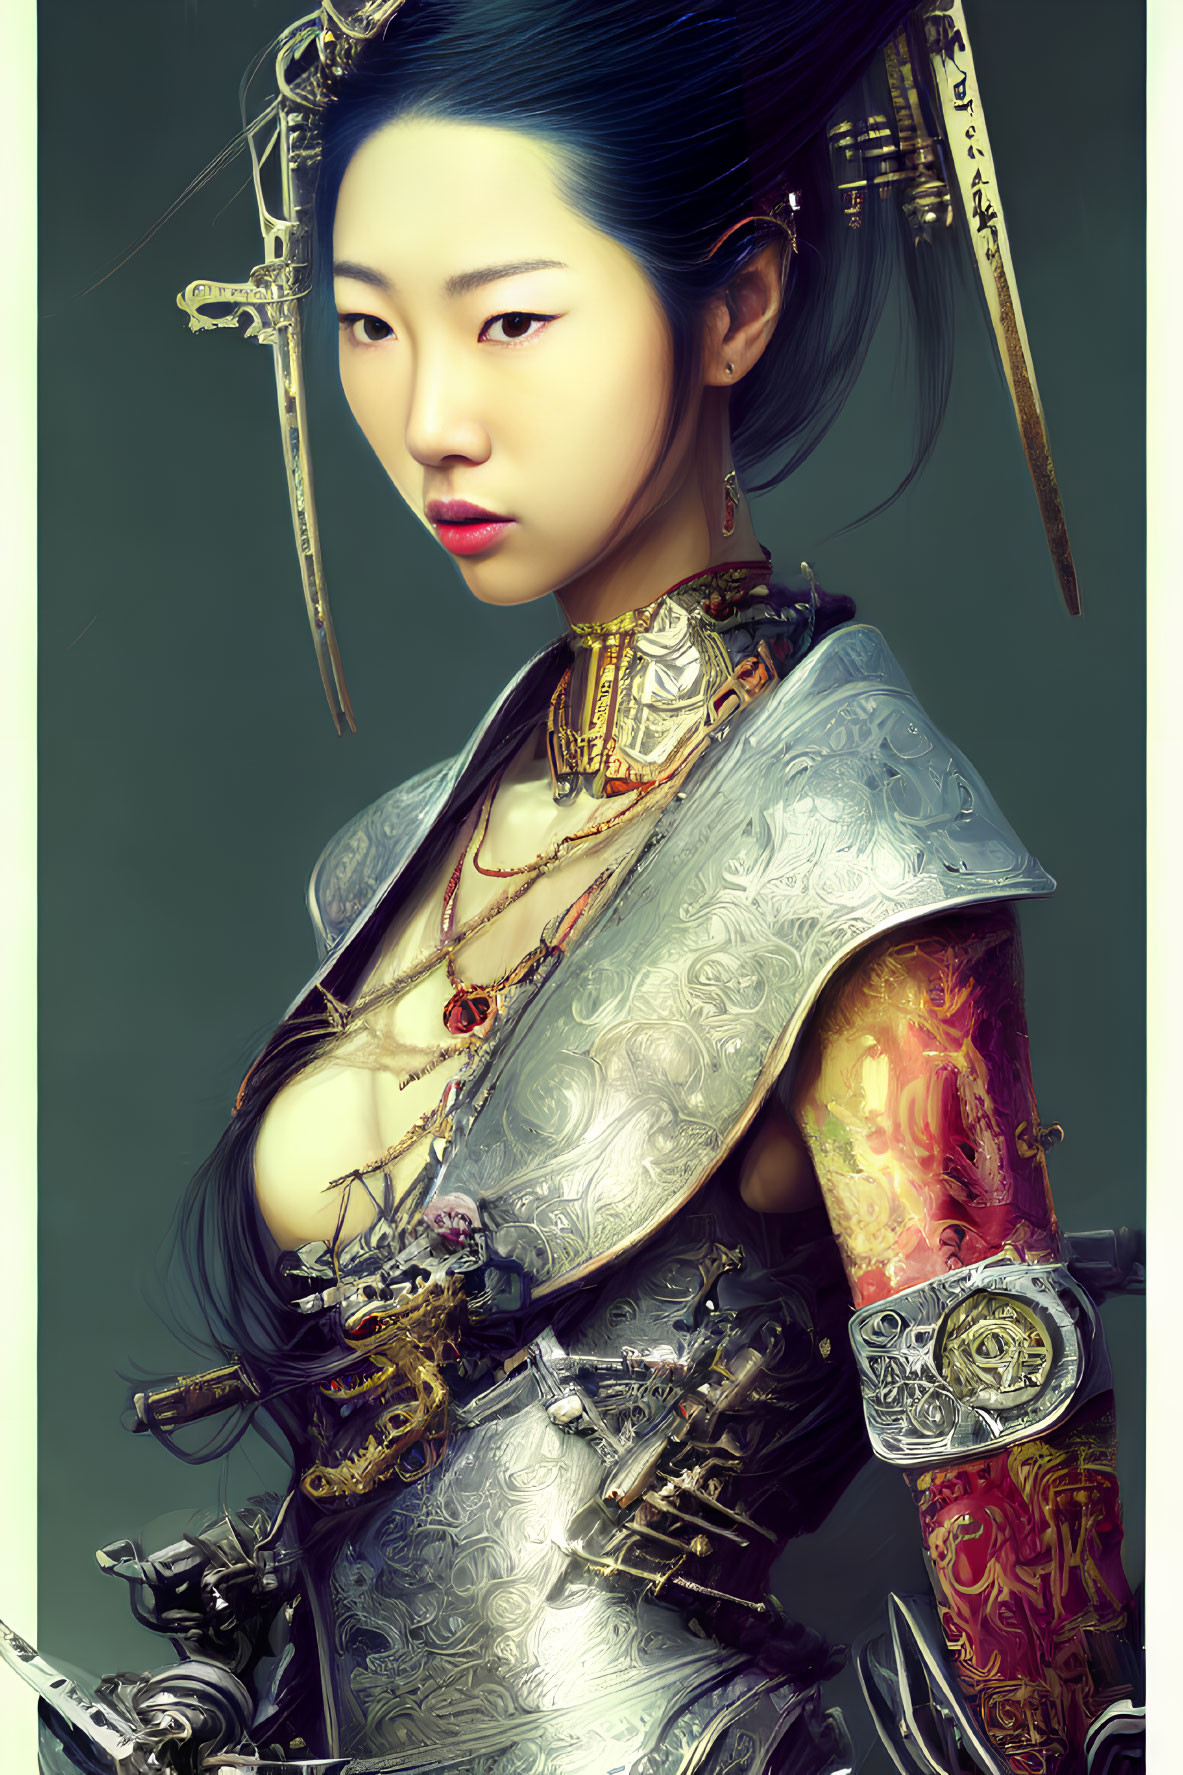 Asian warrior woman in traditional attire with futuristic armor and sword.